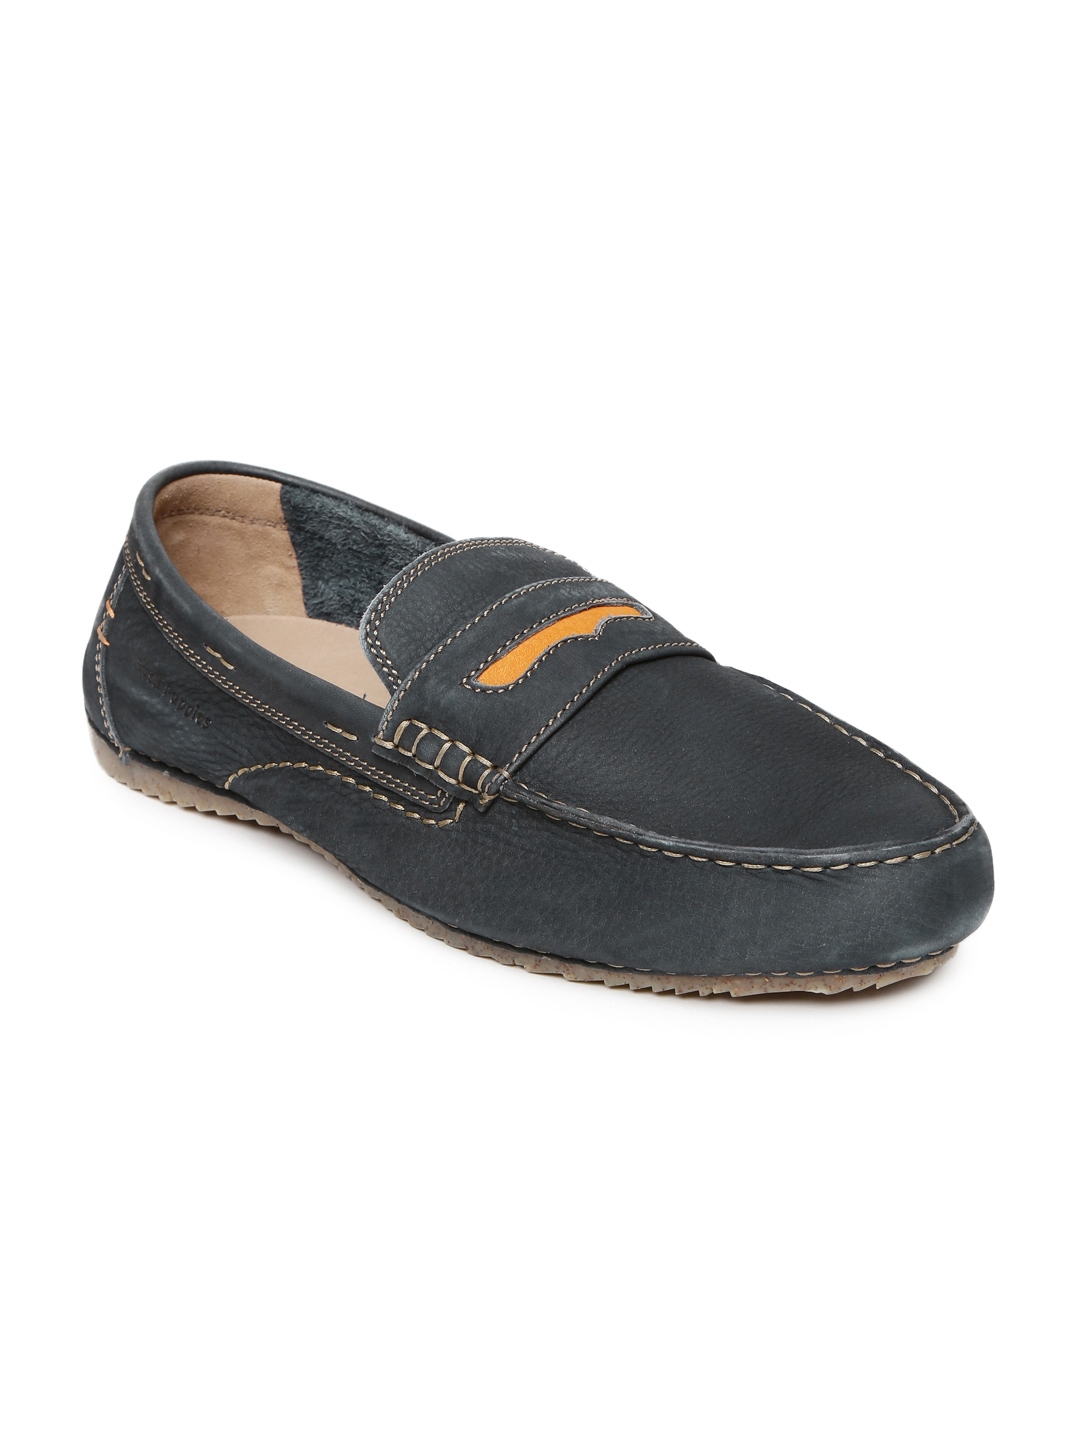 Buy Hush Puppies Men Blue Loafers - Casual Shoes for Men 1878227 | Myntra